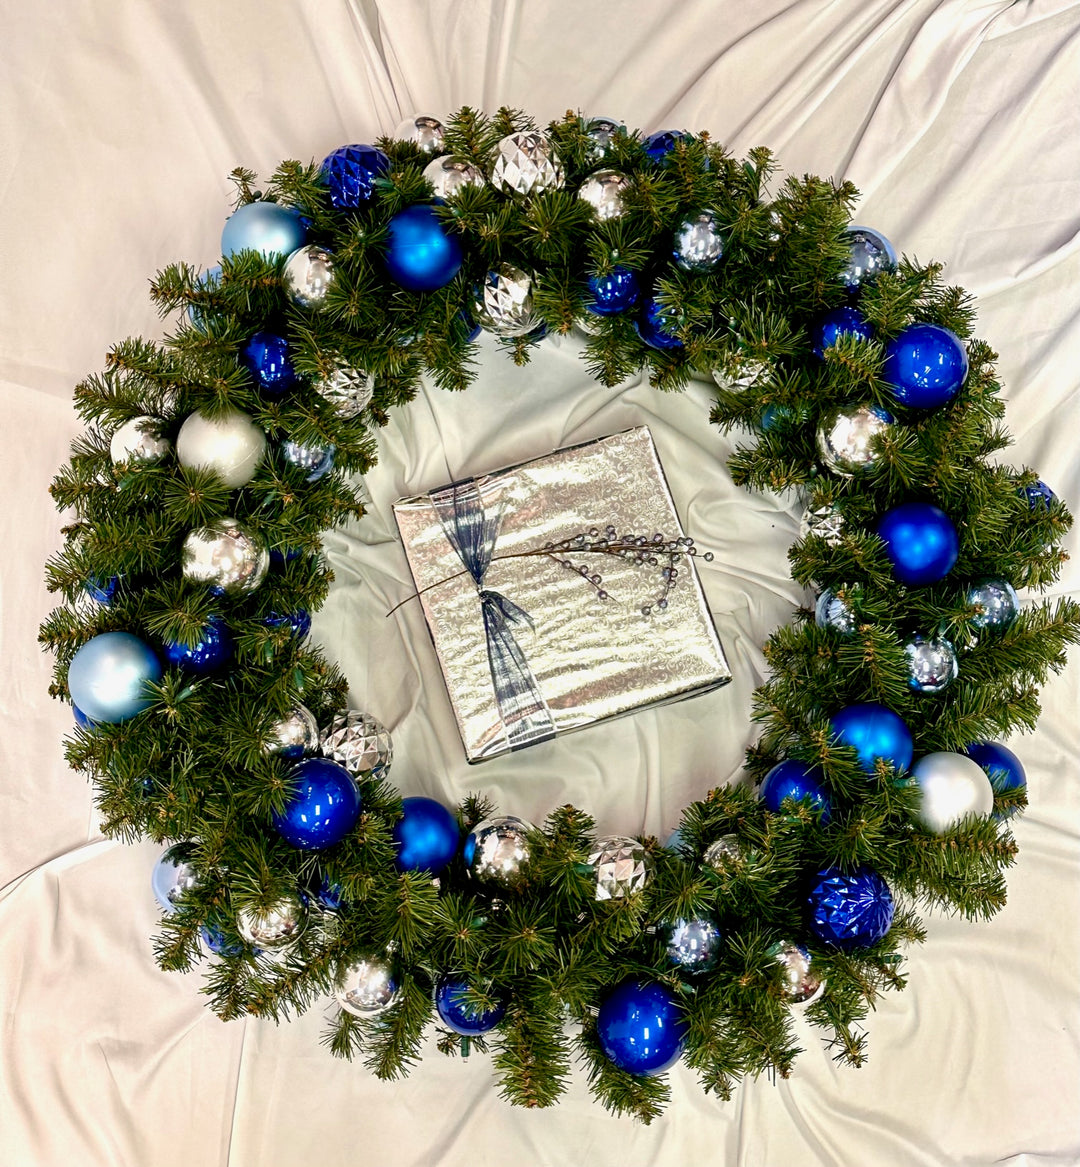 Christmas By Krebs Shatterproof Wreath Decorating Kits - ORNAMENTS ONLY - UV and Weather Resistant (Blue, Silver & White - UV, 48 Inch - 88 Ornaments)